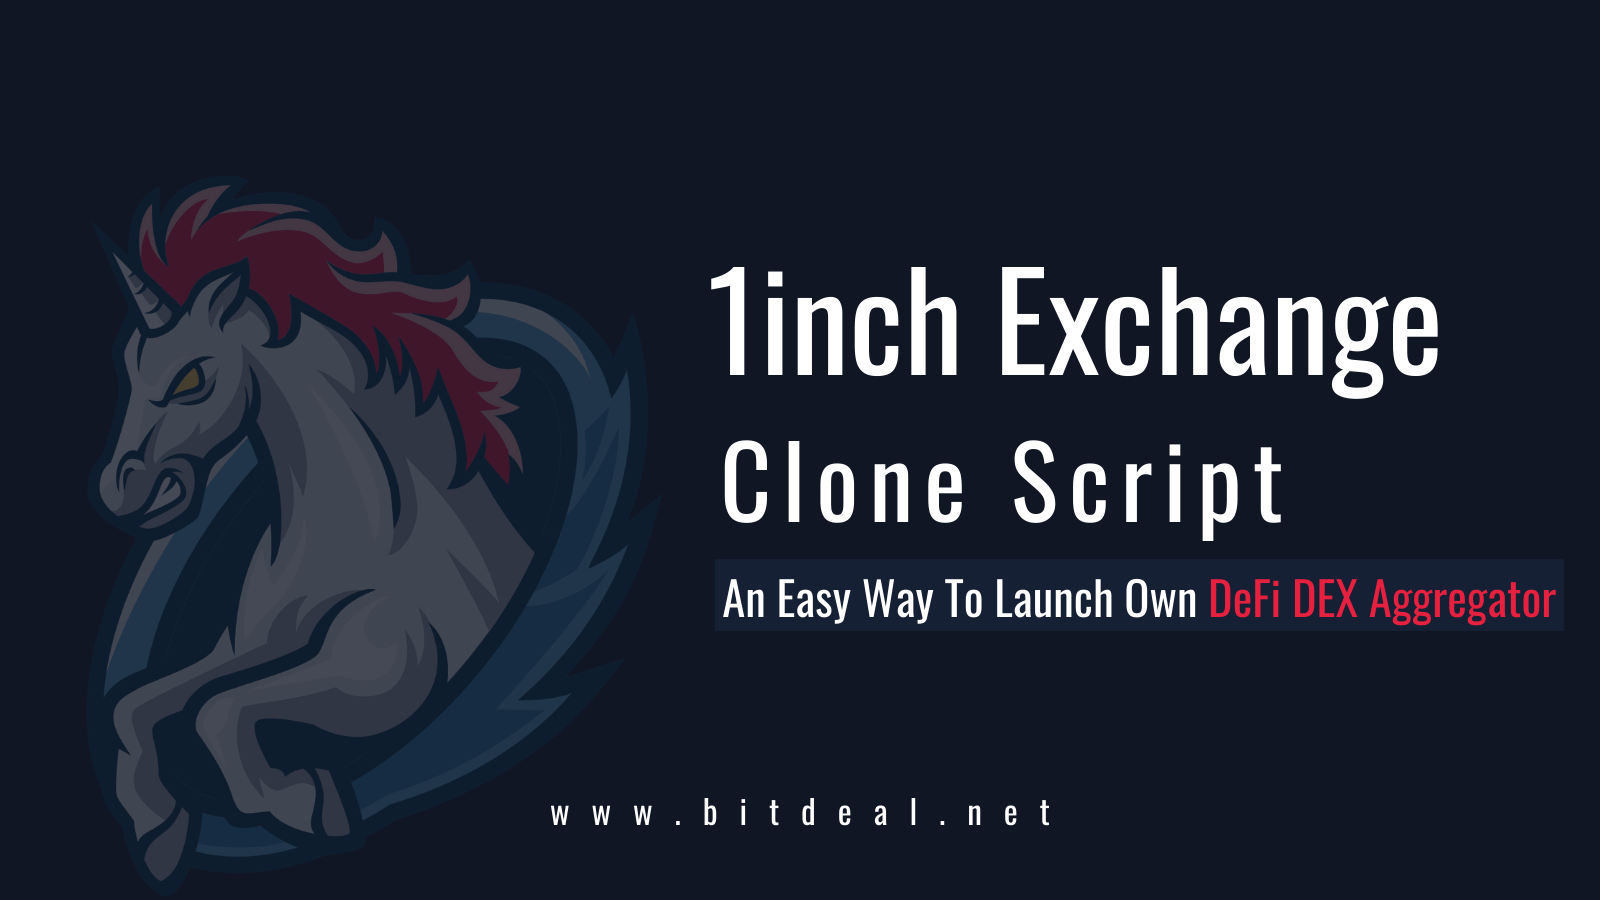 1inch Clone Script To Launch Your Own DeFi Aggregator